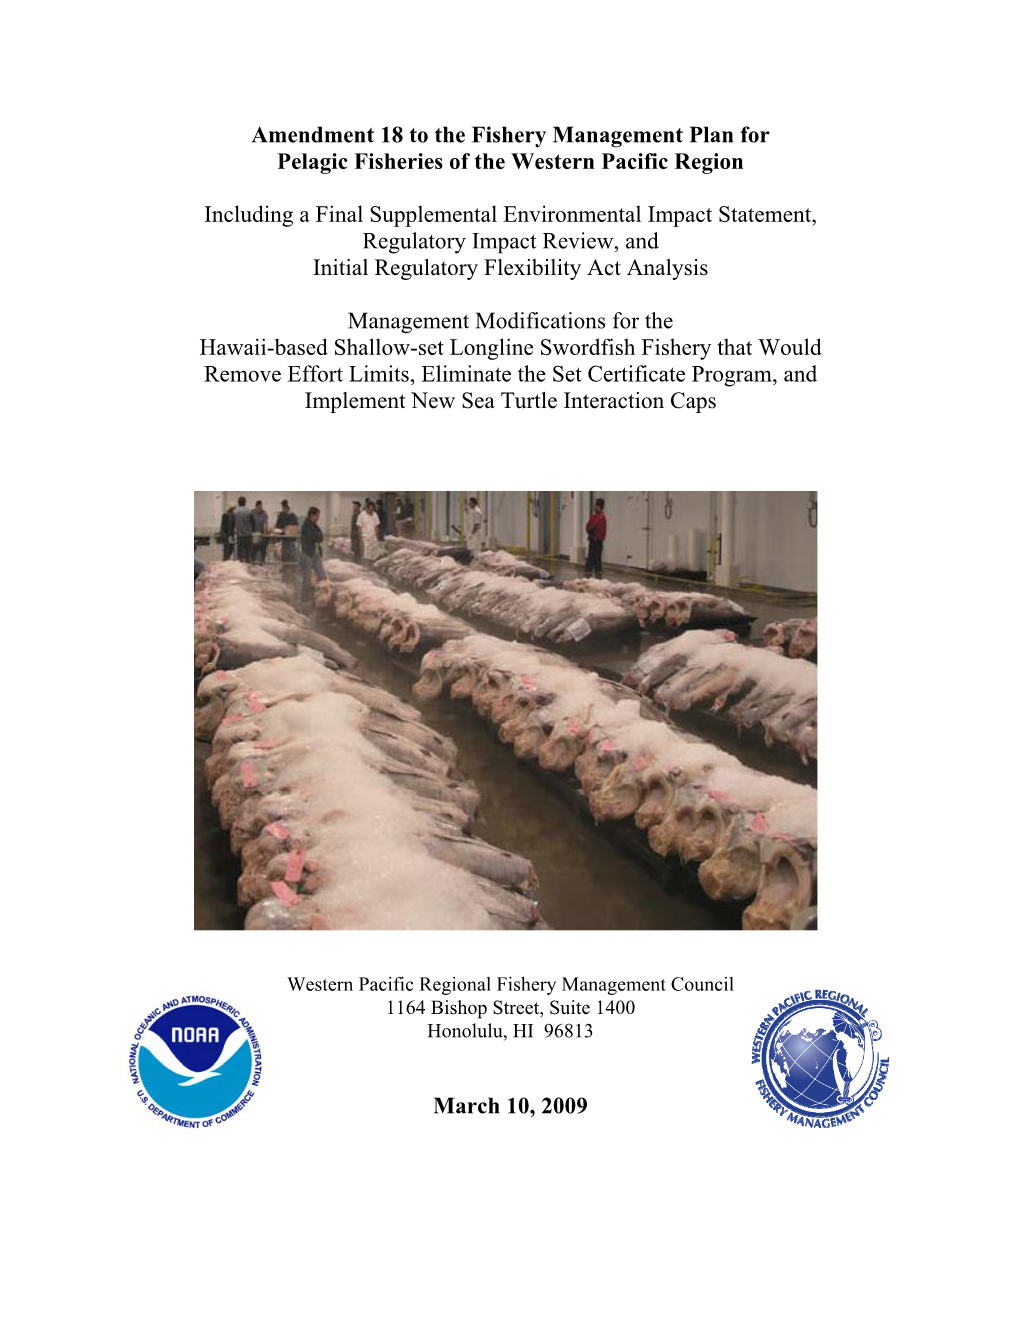 Amendment 18 to the Fishery Management Plan for Pelagic Fisheries of the Western Pacific Region